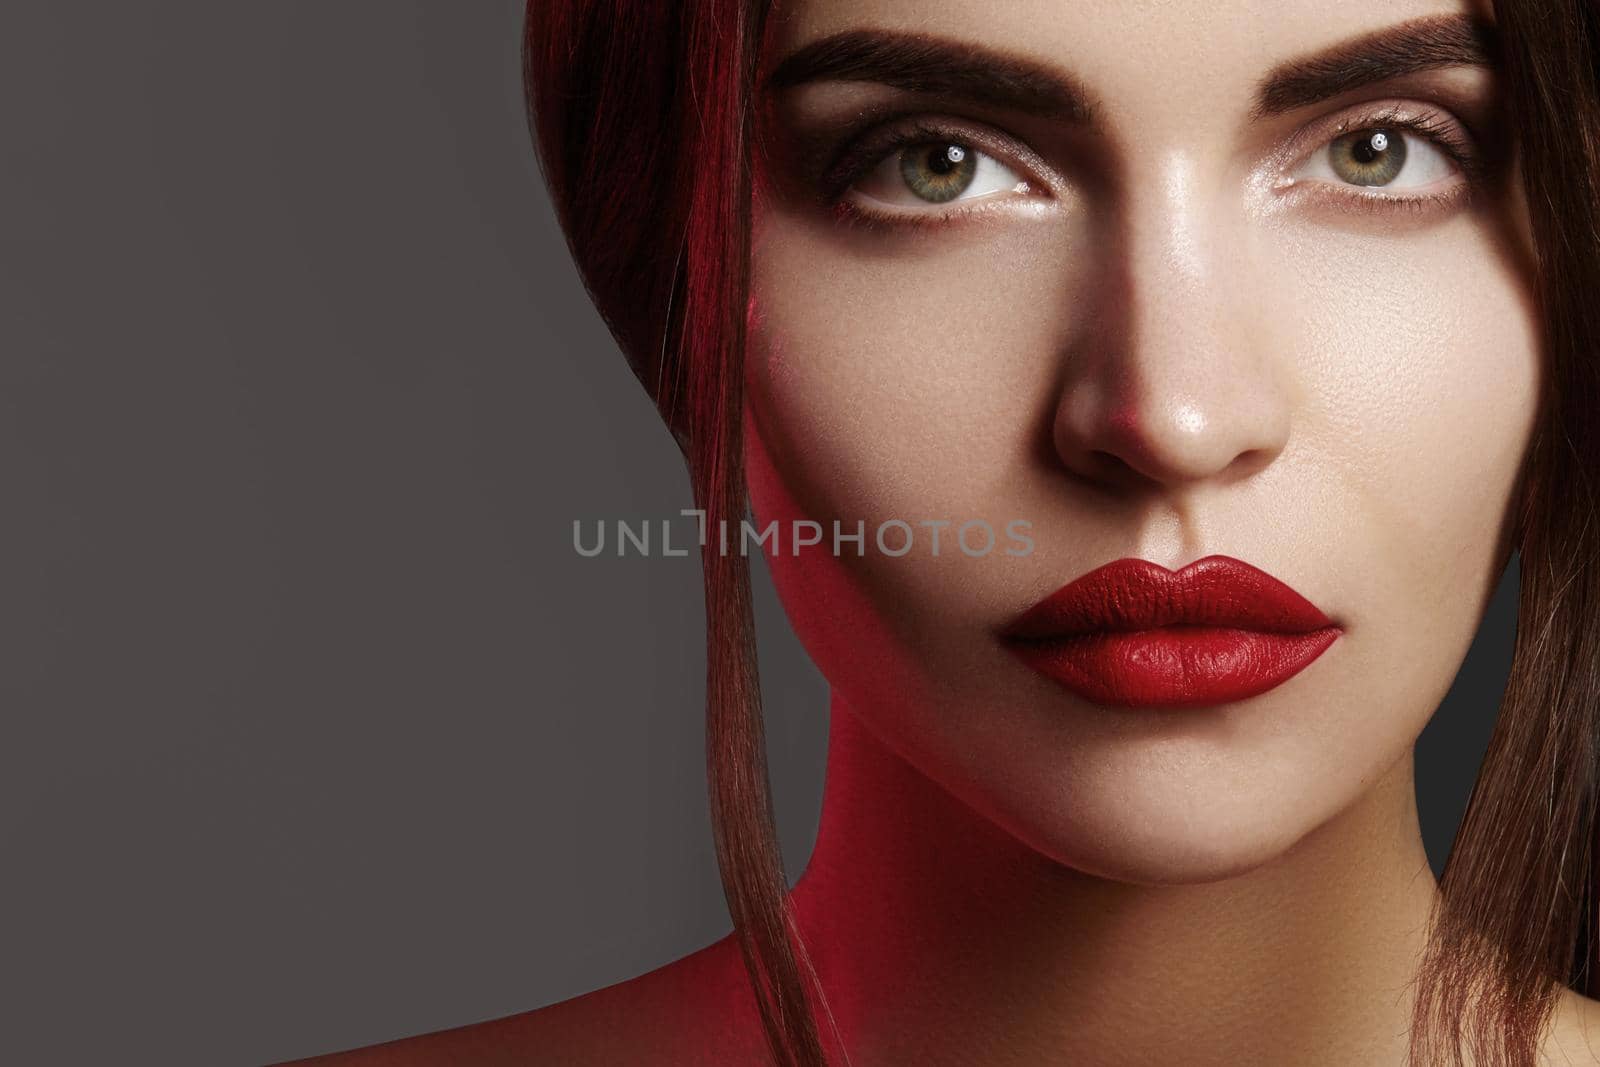 Closeup portrait with of beautiful woman face. Red color of fashion lip makeup, clean shiny skin and strong eyebrows by MarinaFrost